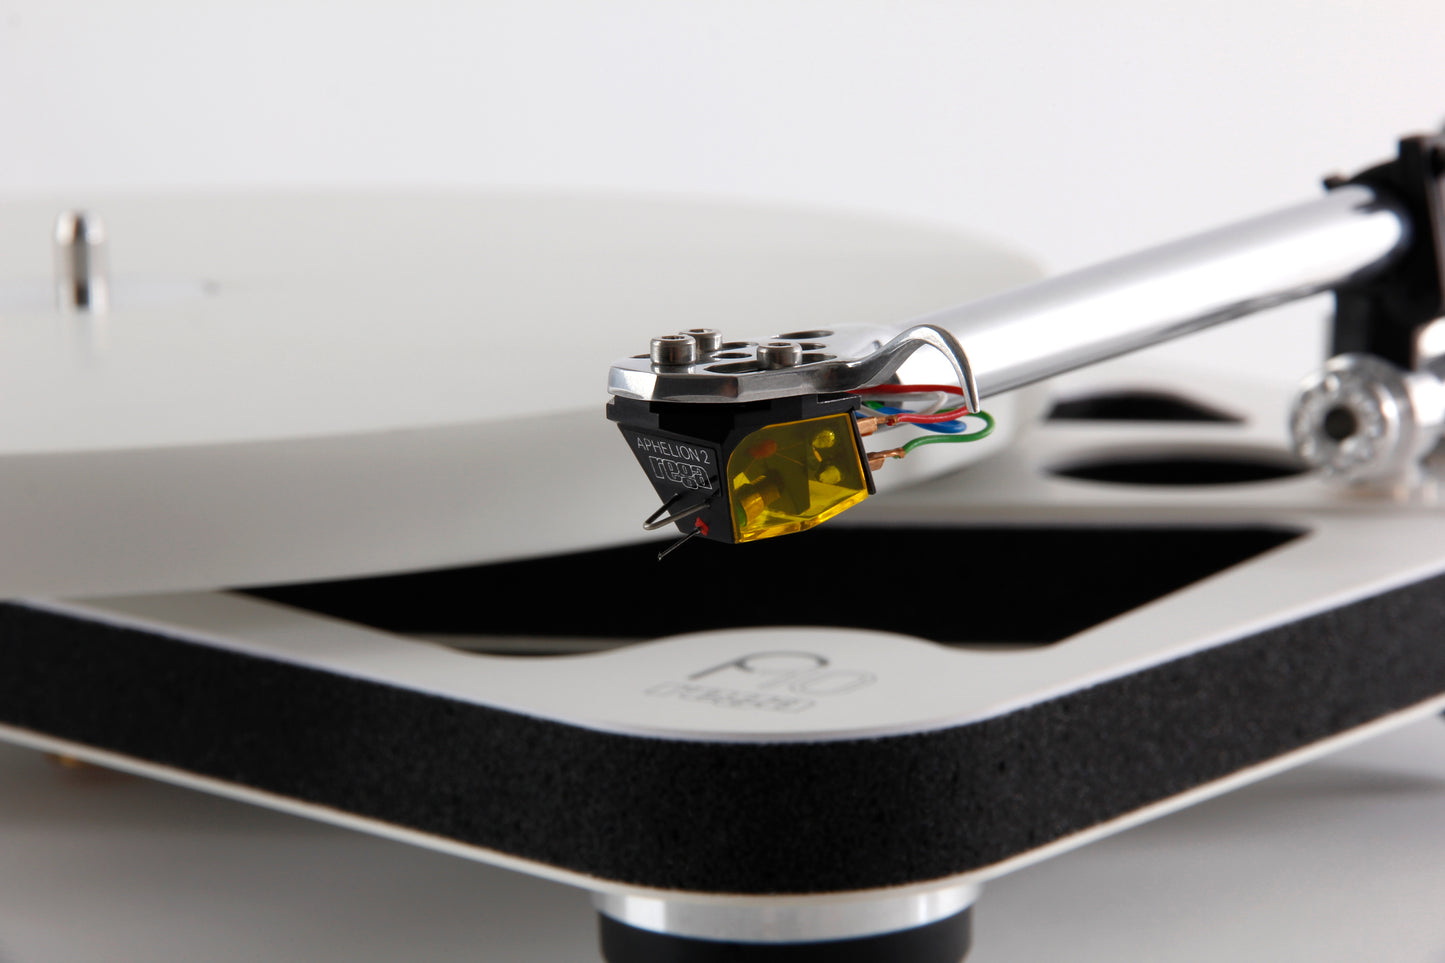 Rega Planar 10 Turntable (Click and Collect only)